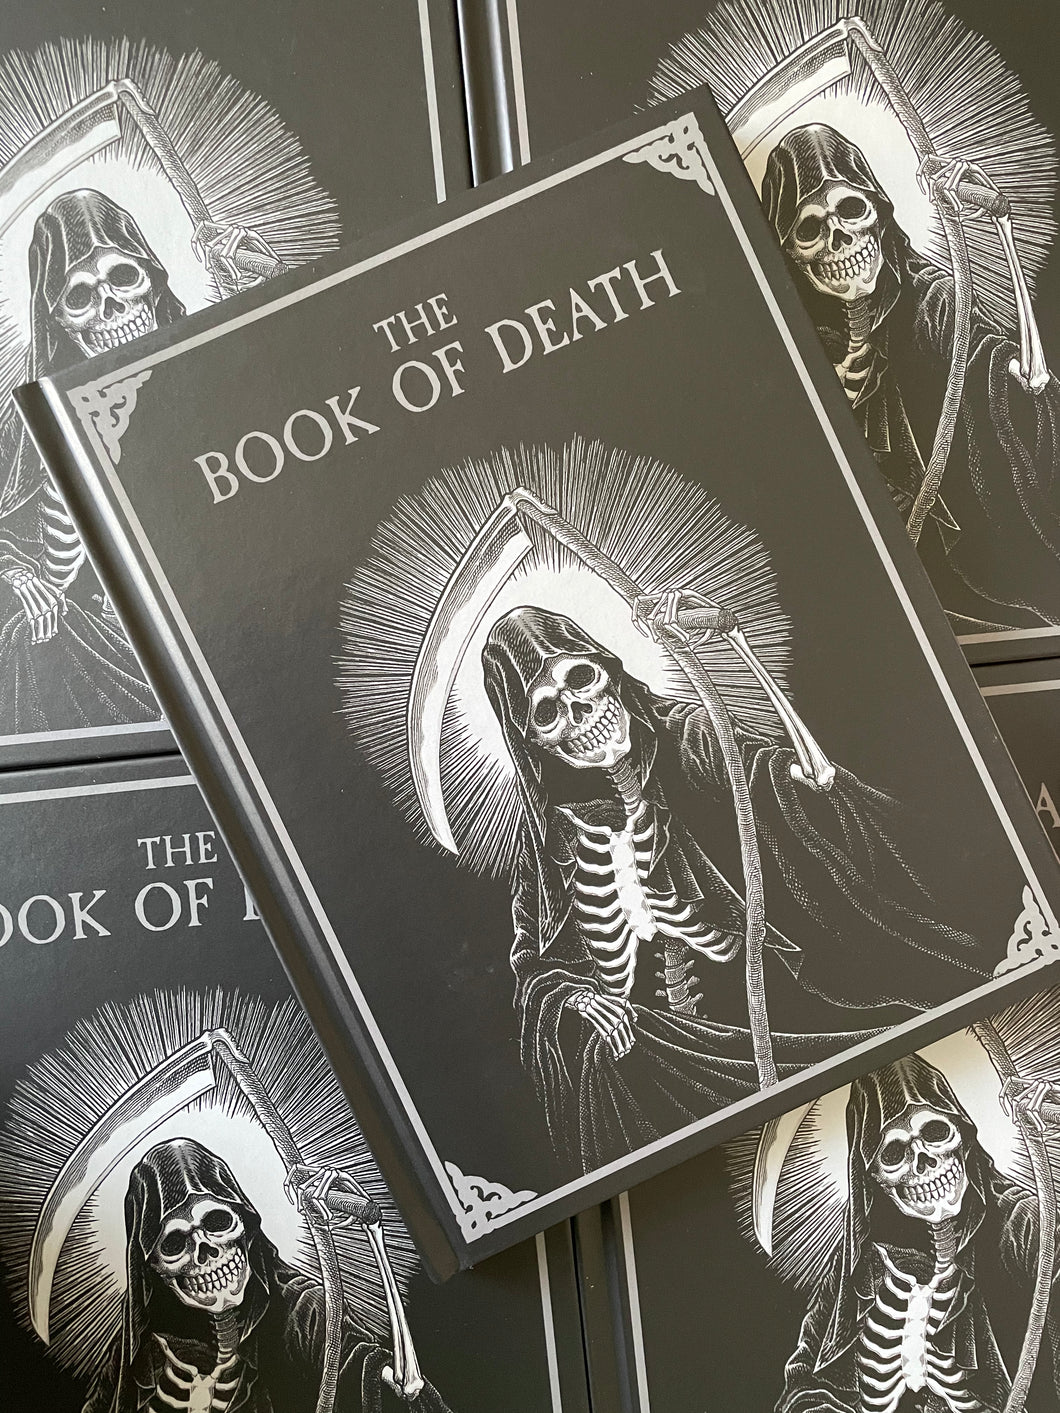 The Book of death